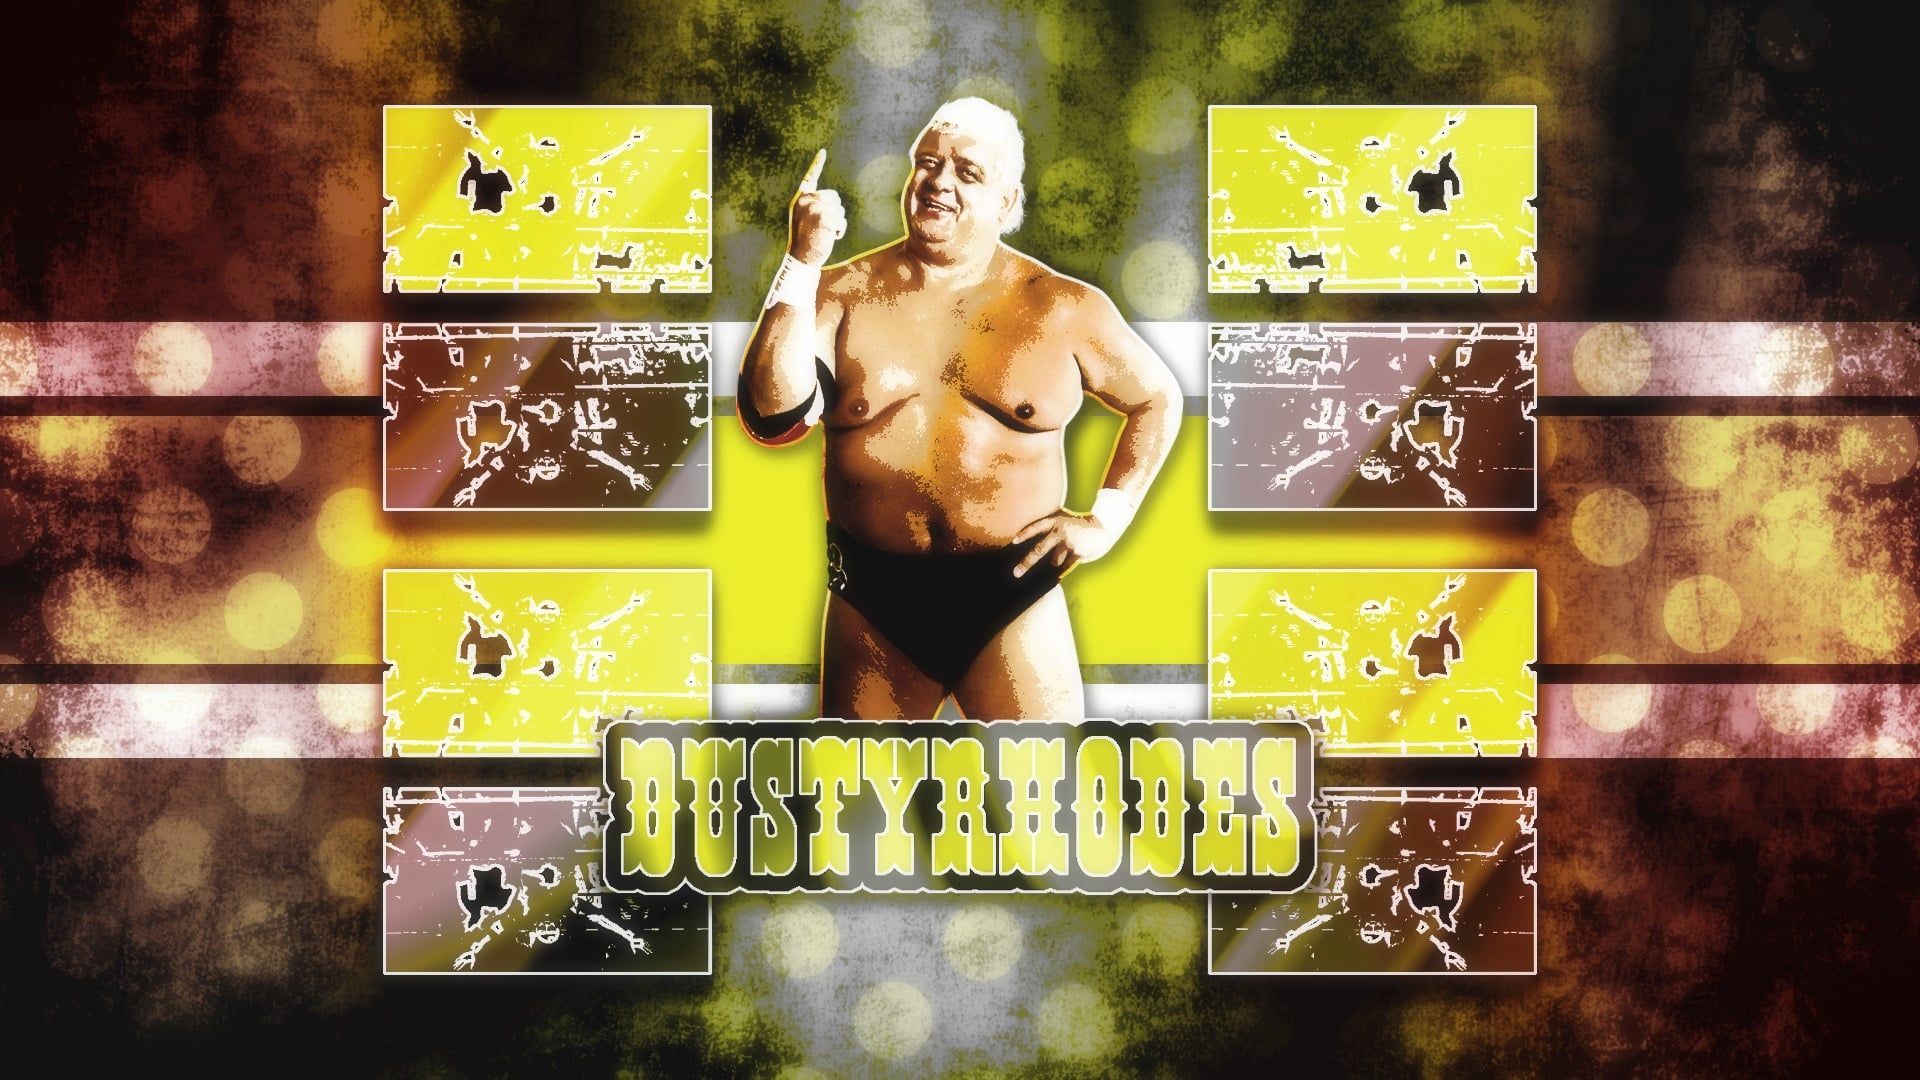 The American Dream: The Dusty Rhodes Story background